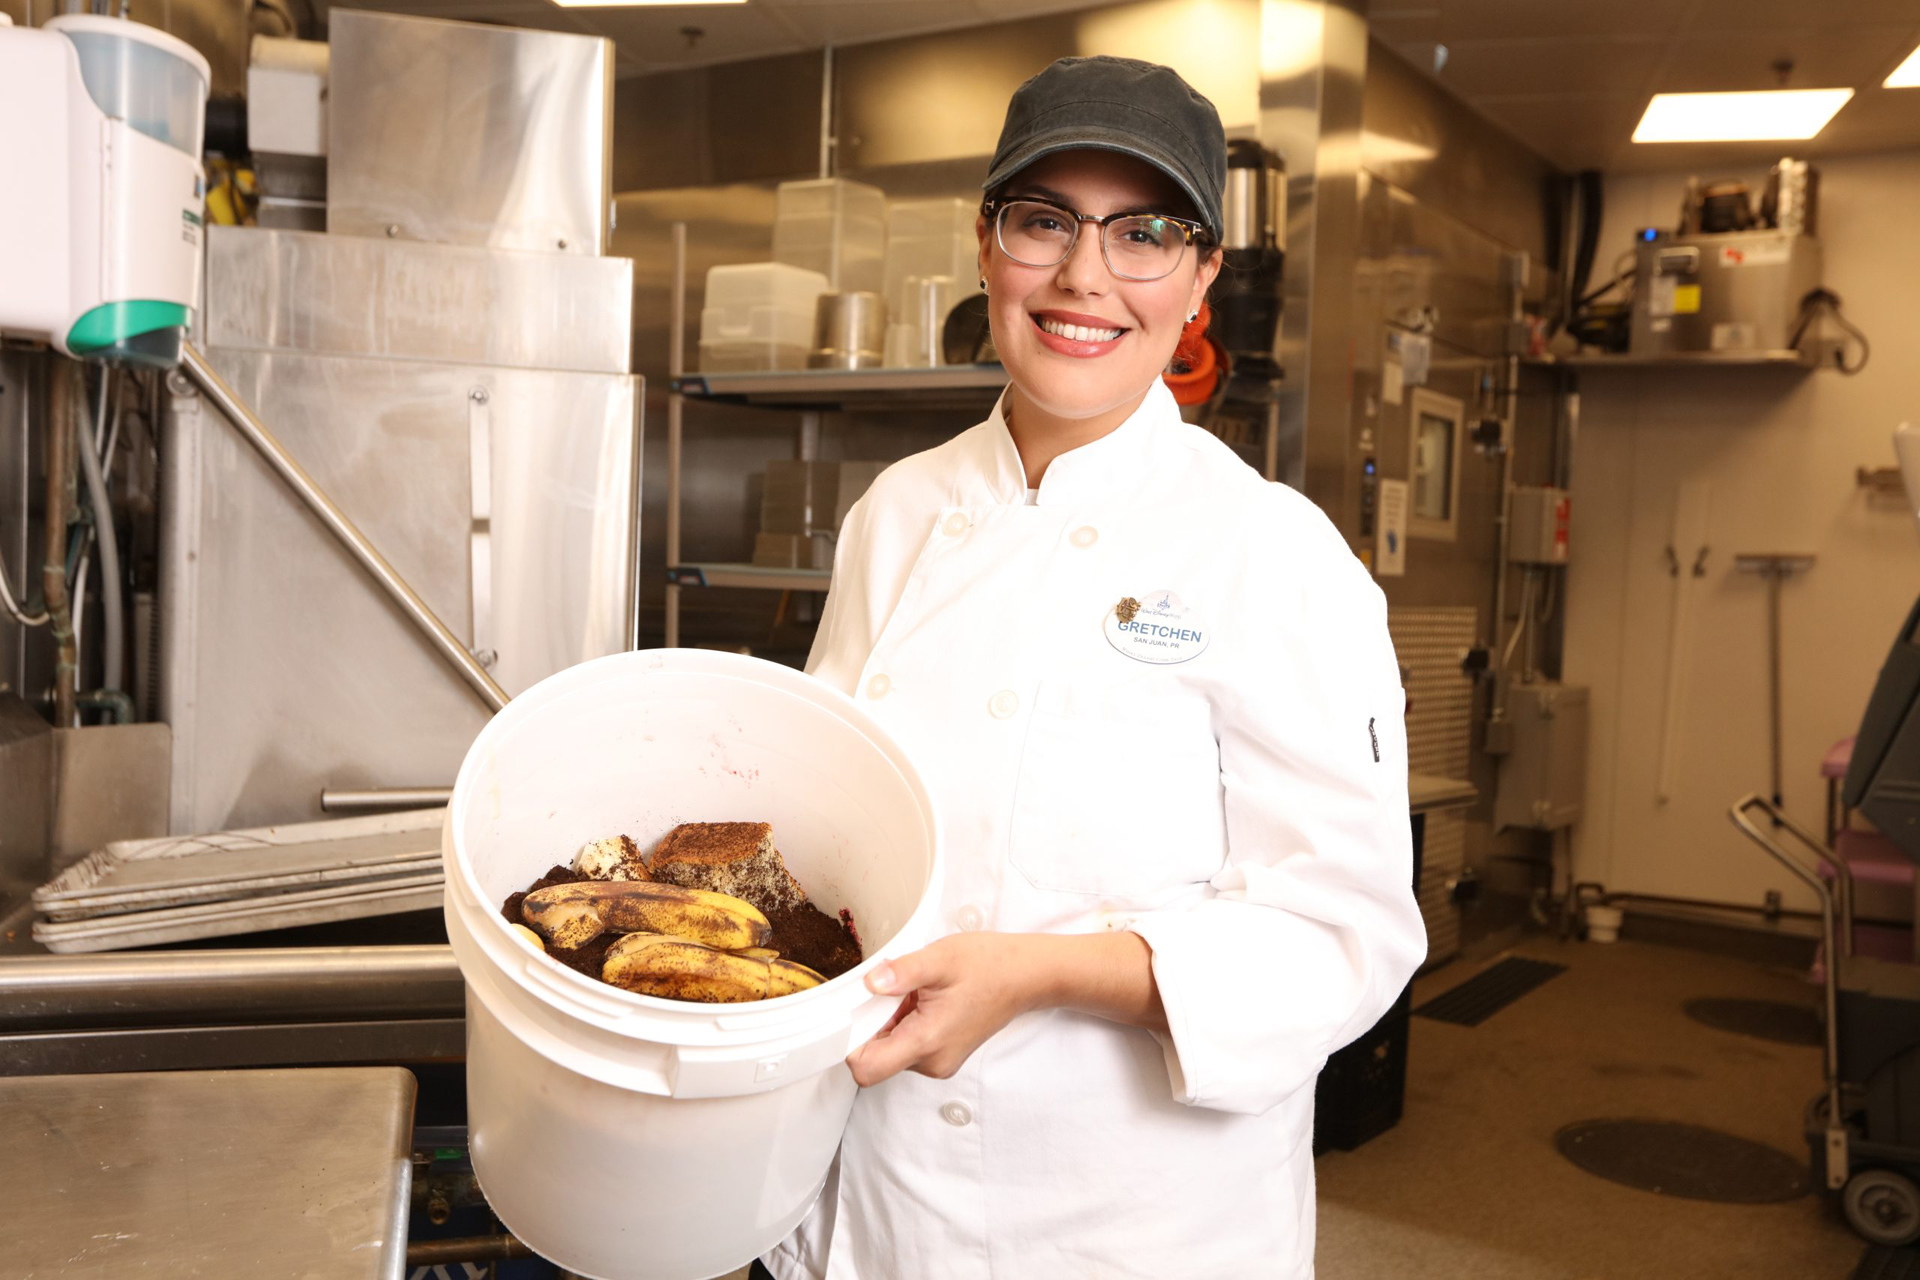 A Disney culinary cast member holding a plastic bucket of food waste in a kitchen.